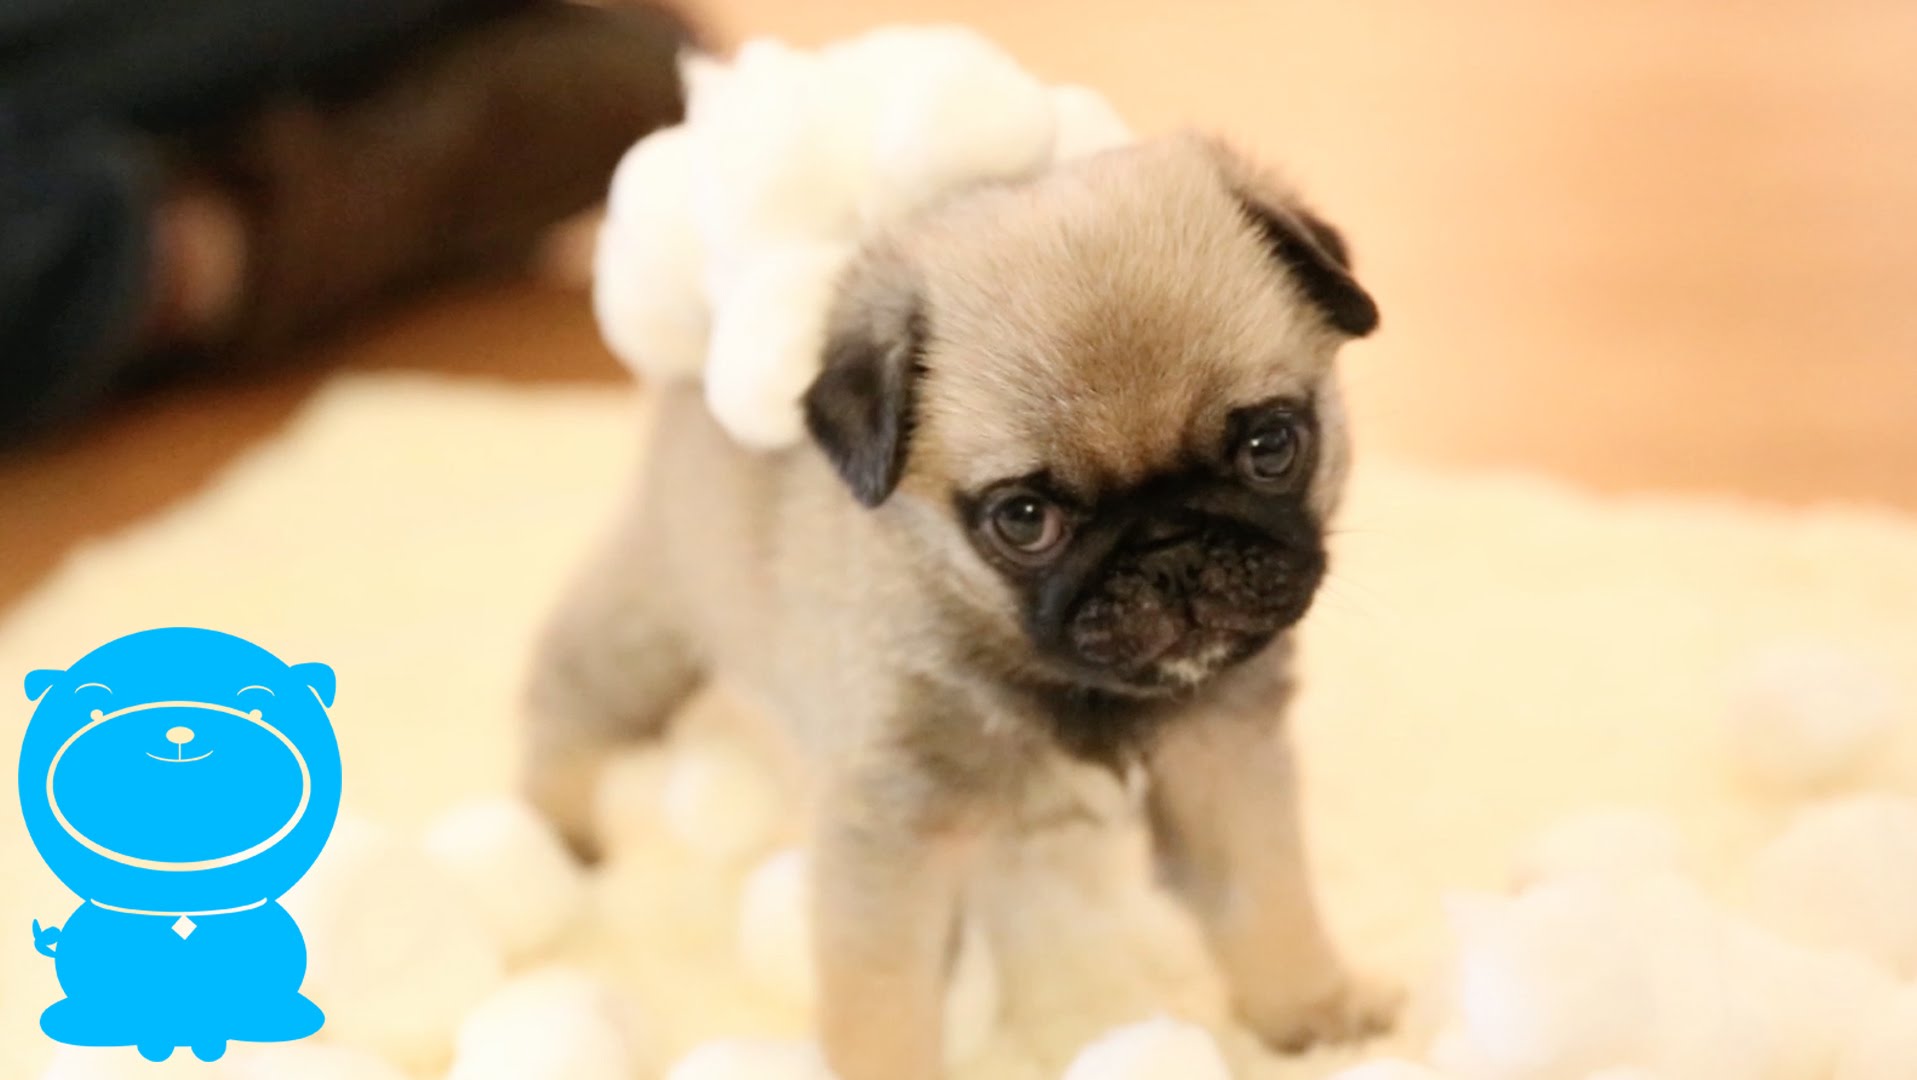 This Adorable Pug Puppy’s New Favorite Activity Will Melt Your Heart!